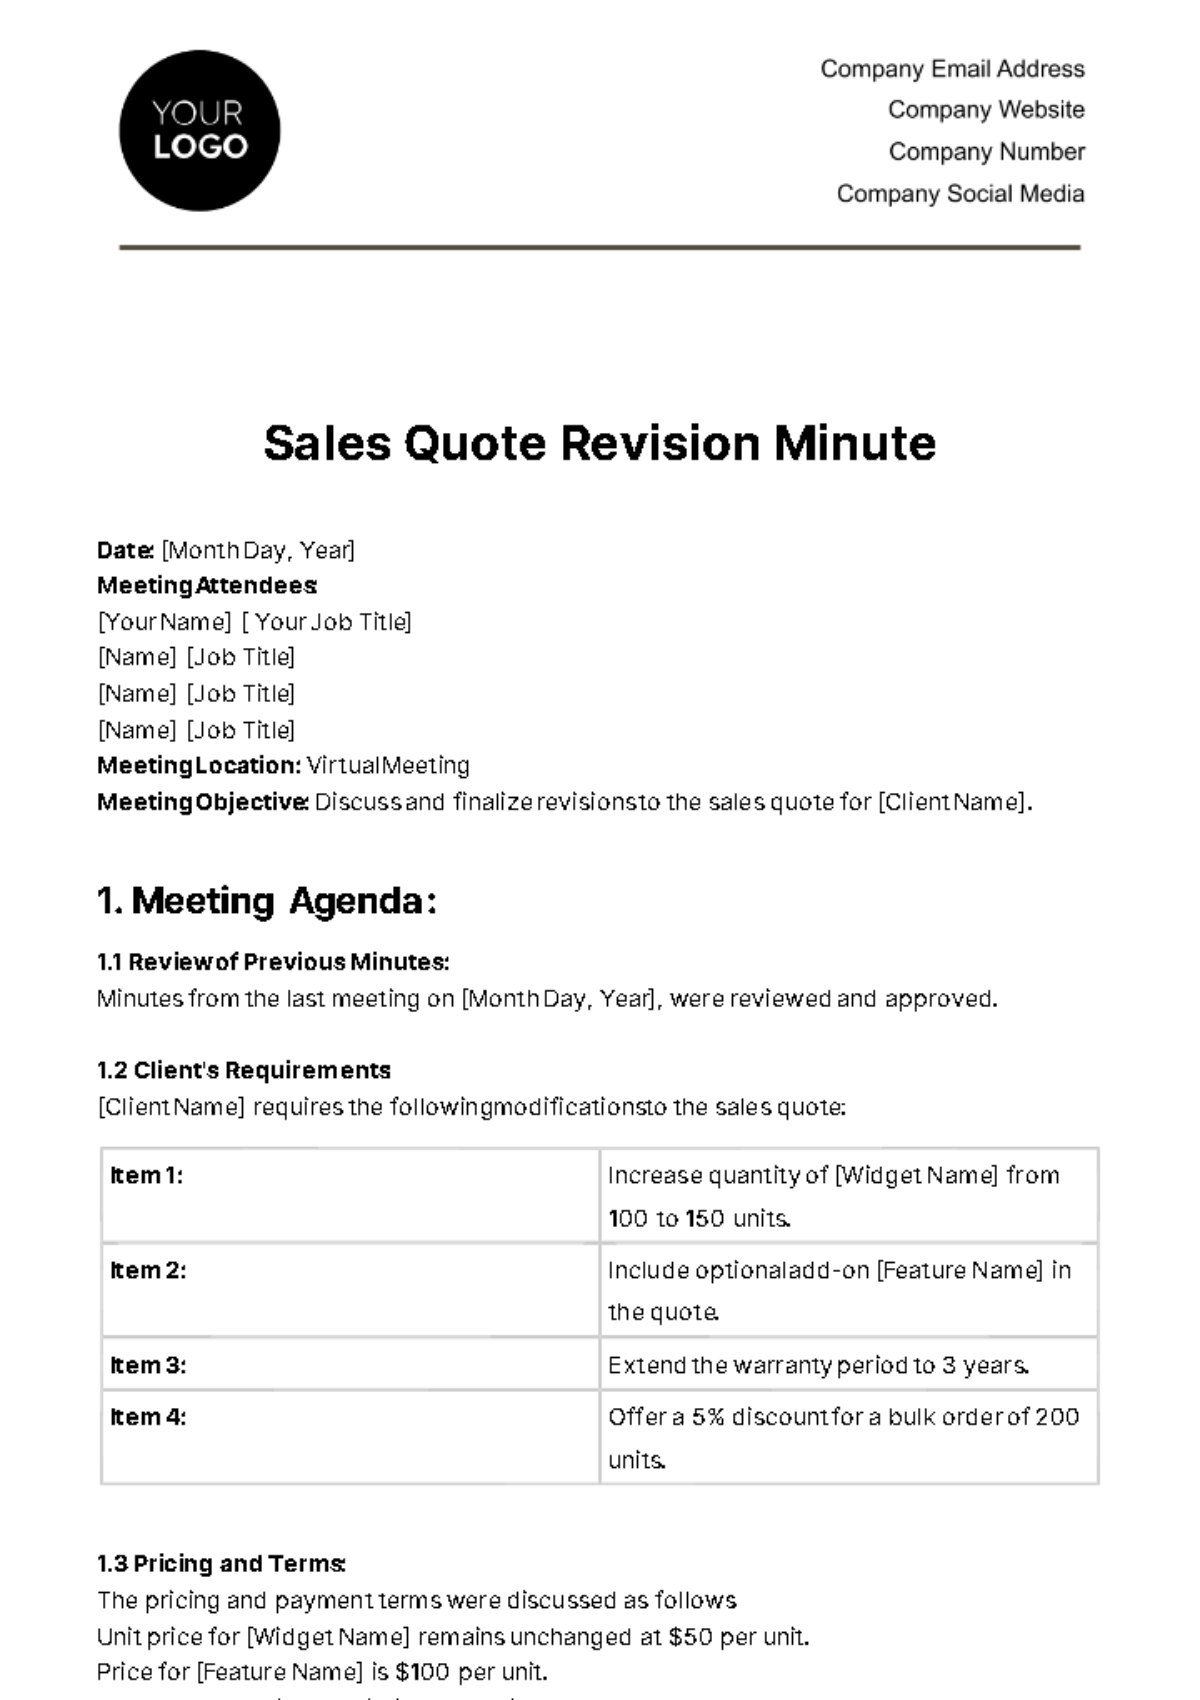 Free Sales Quote Revision Minute Template